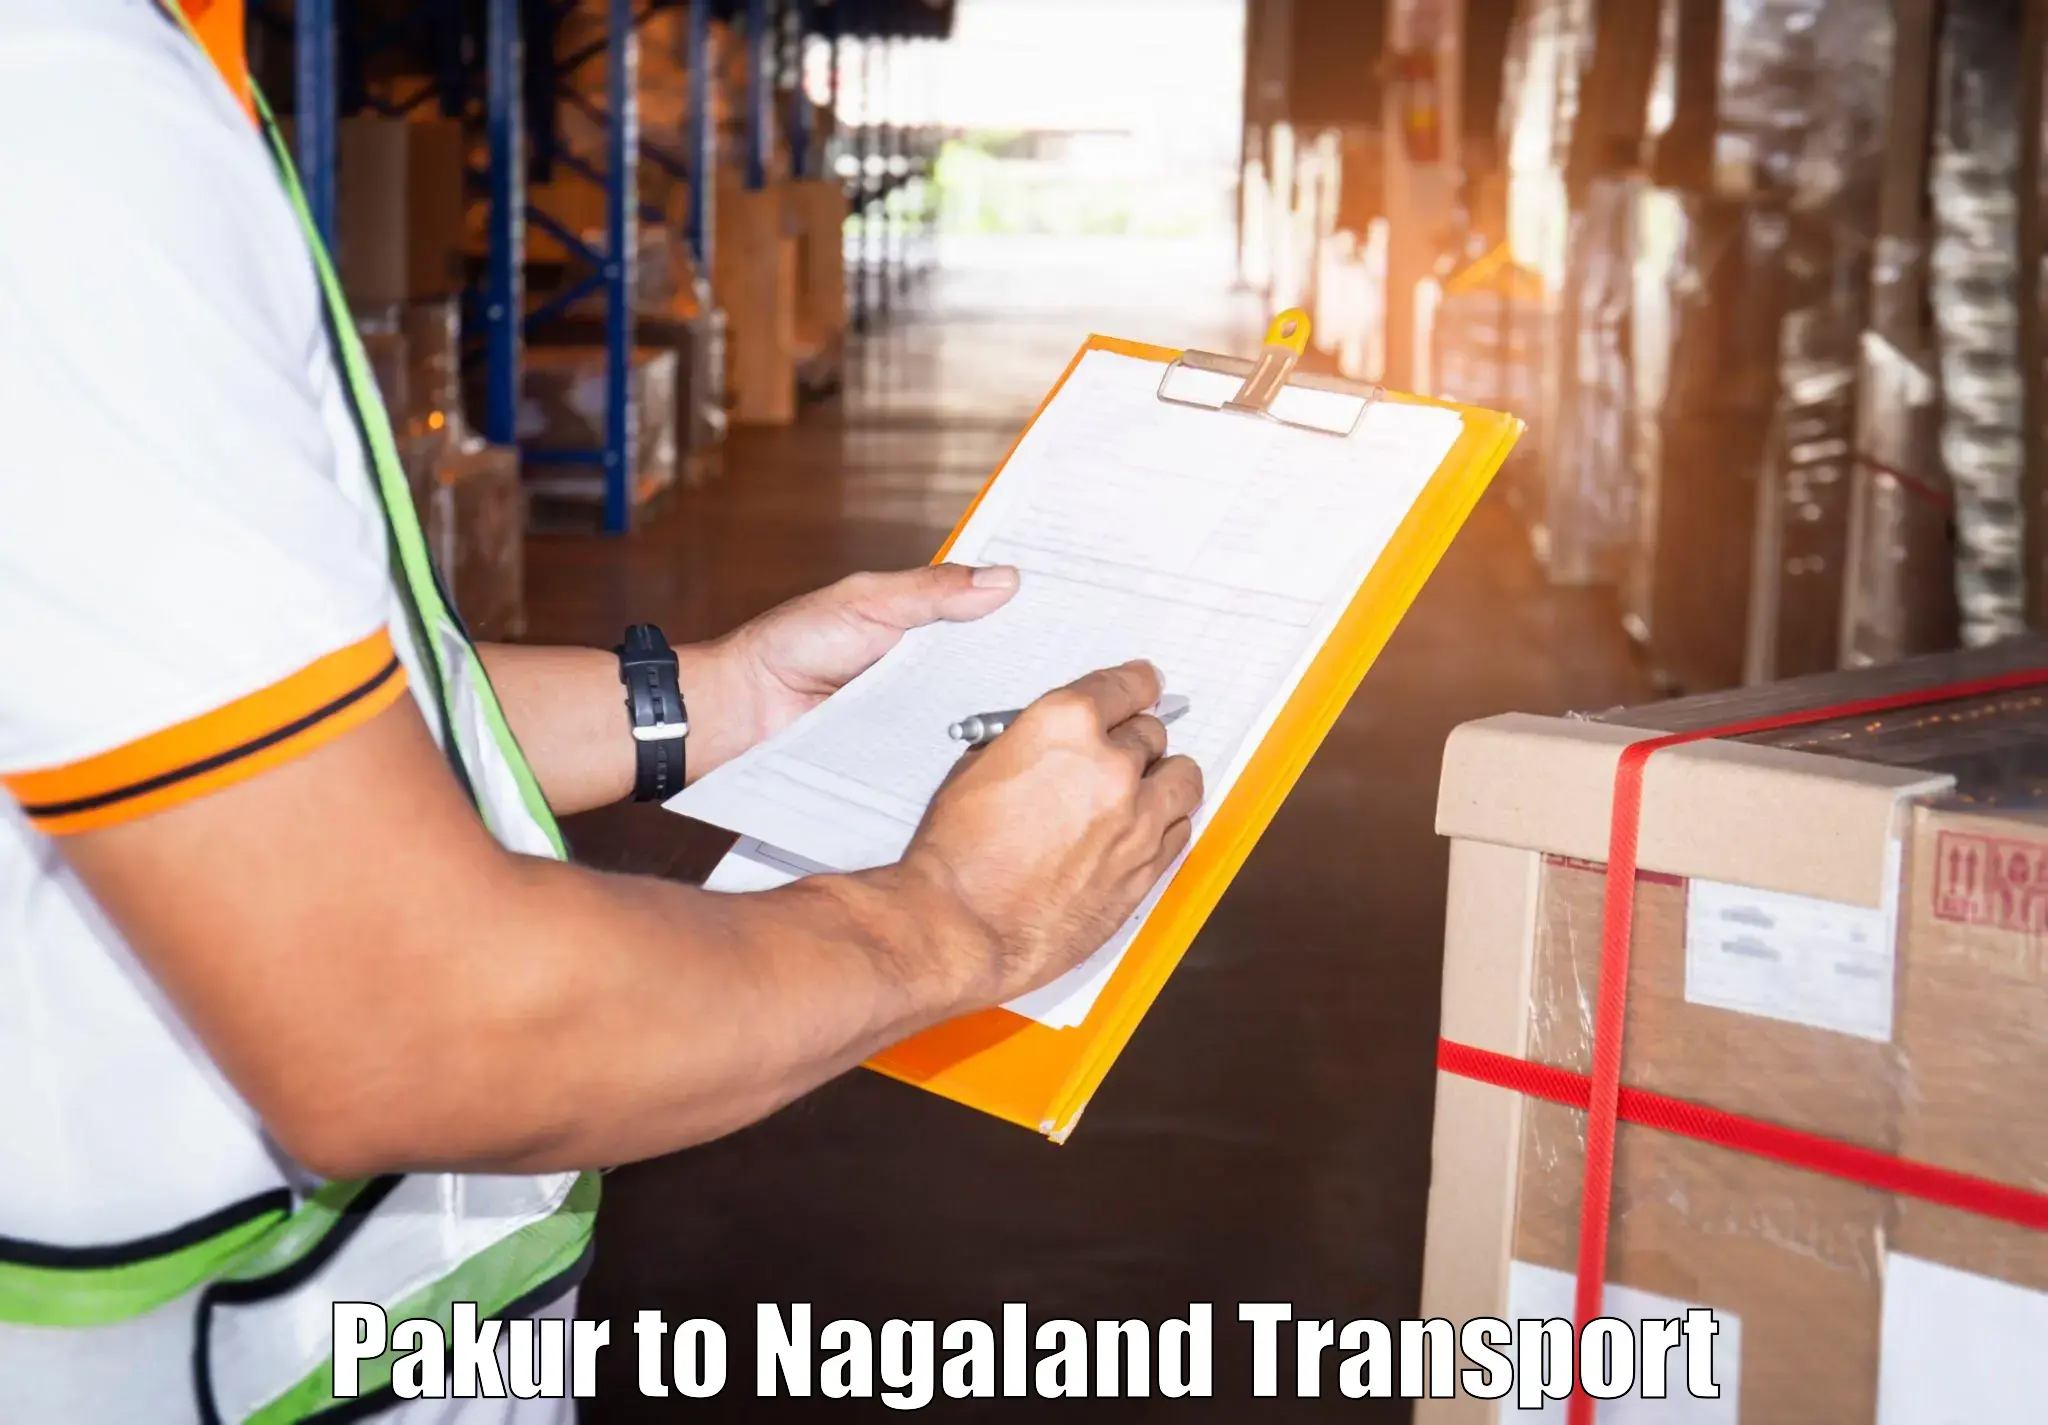 Nationwide transport services Pakur to Nagaland